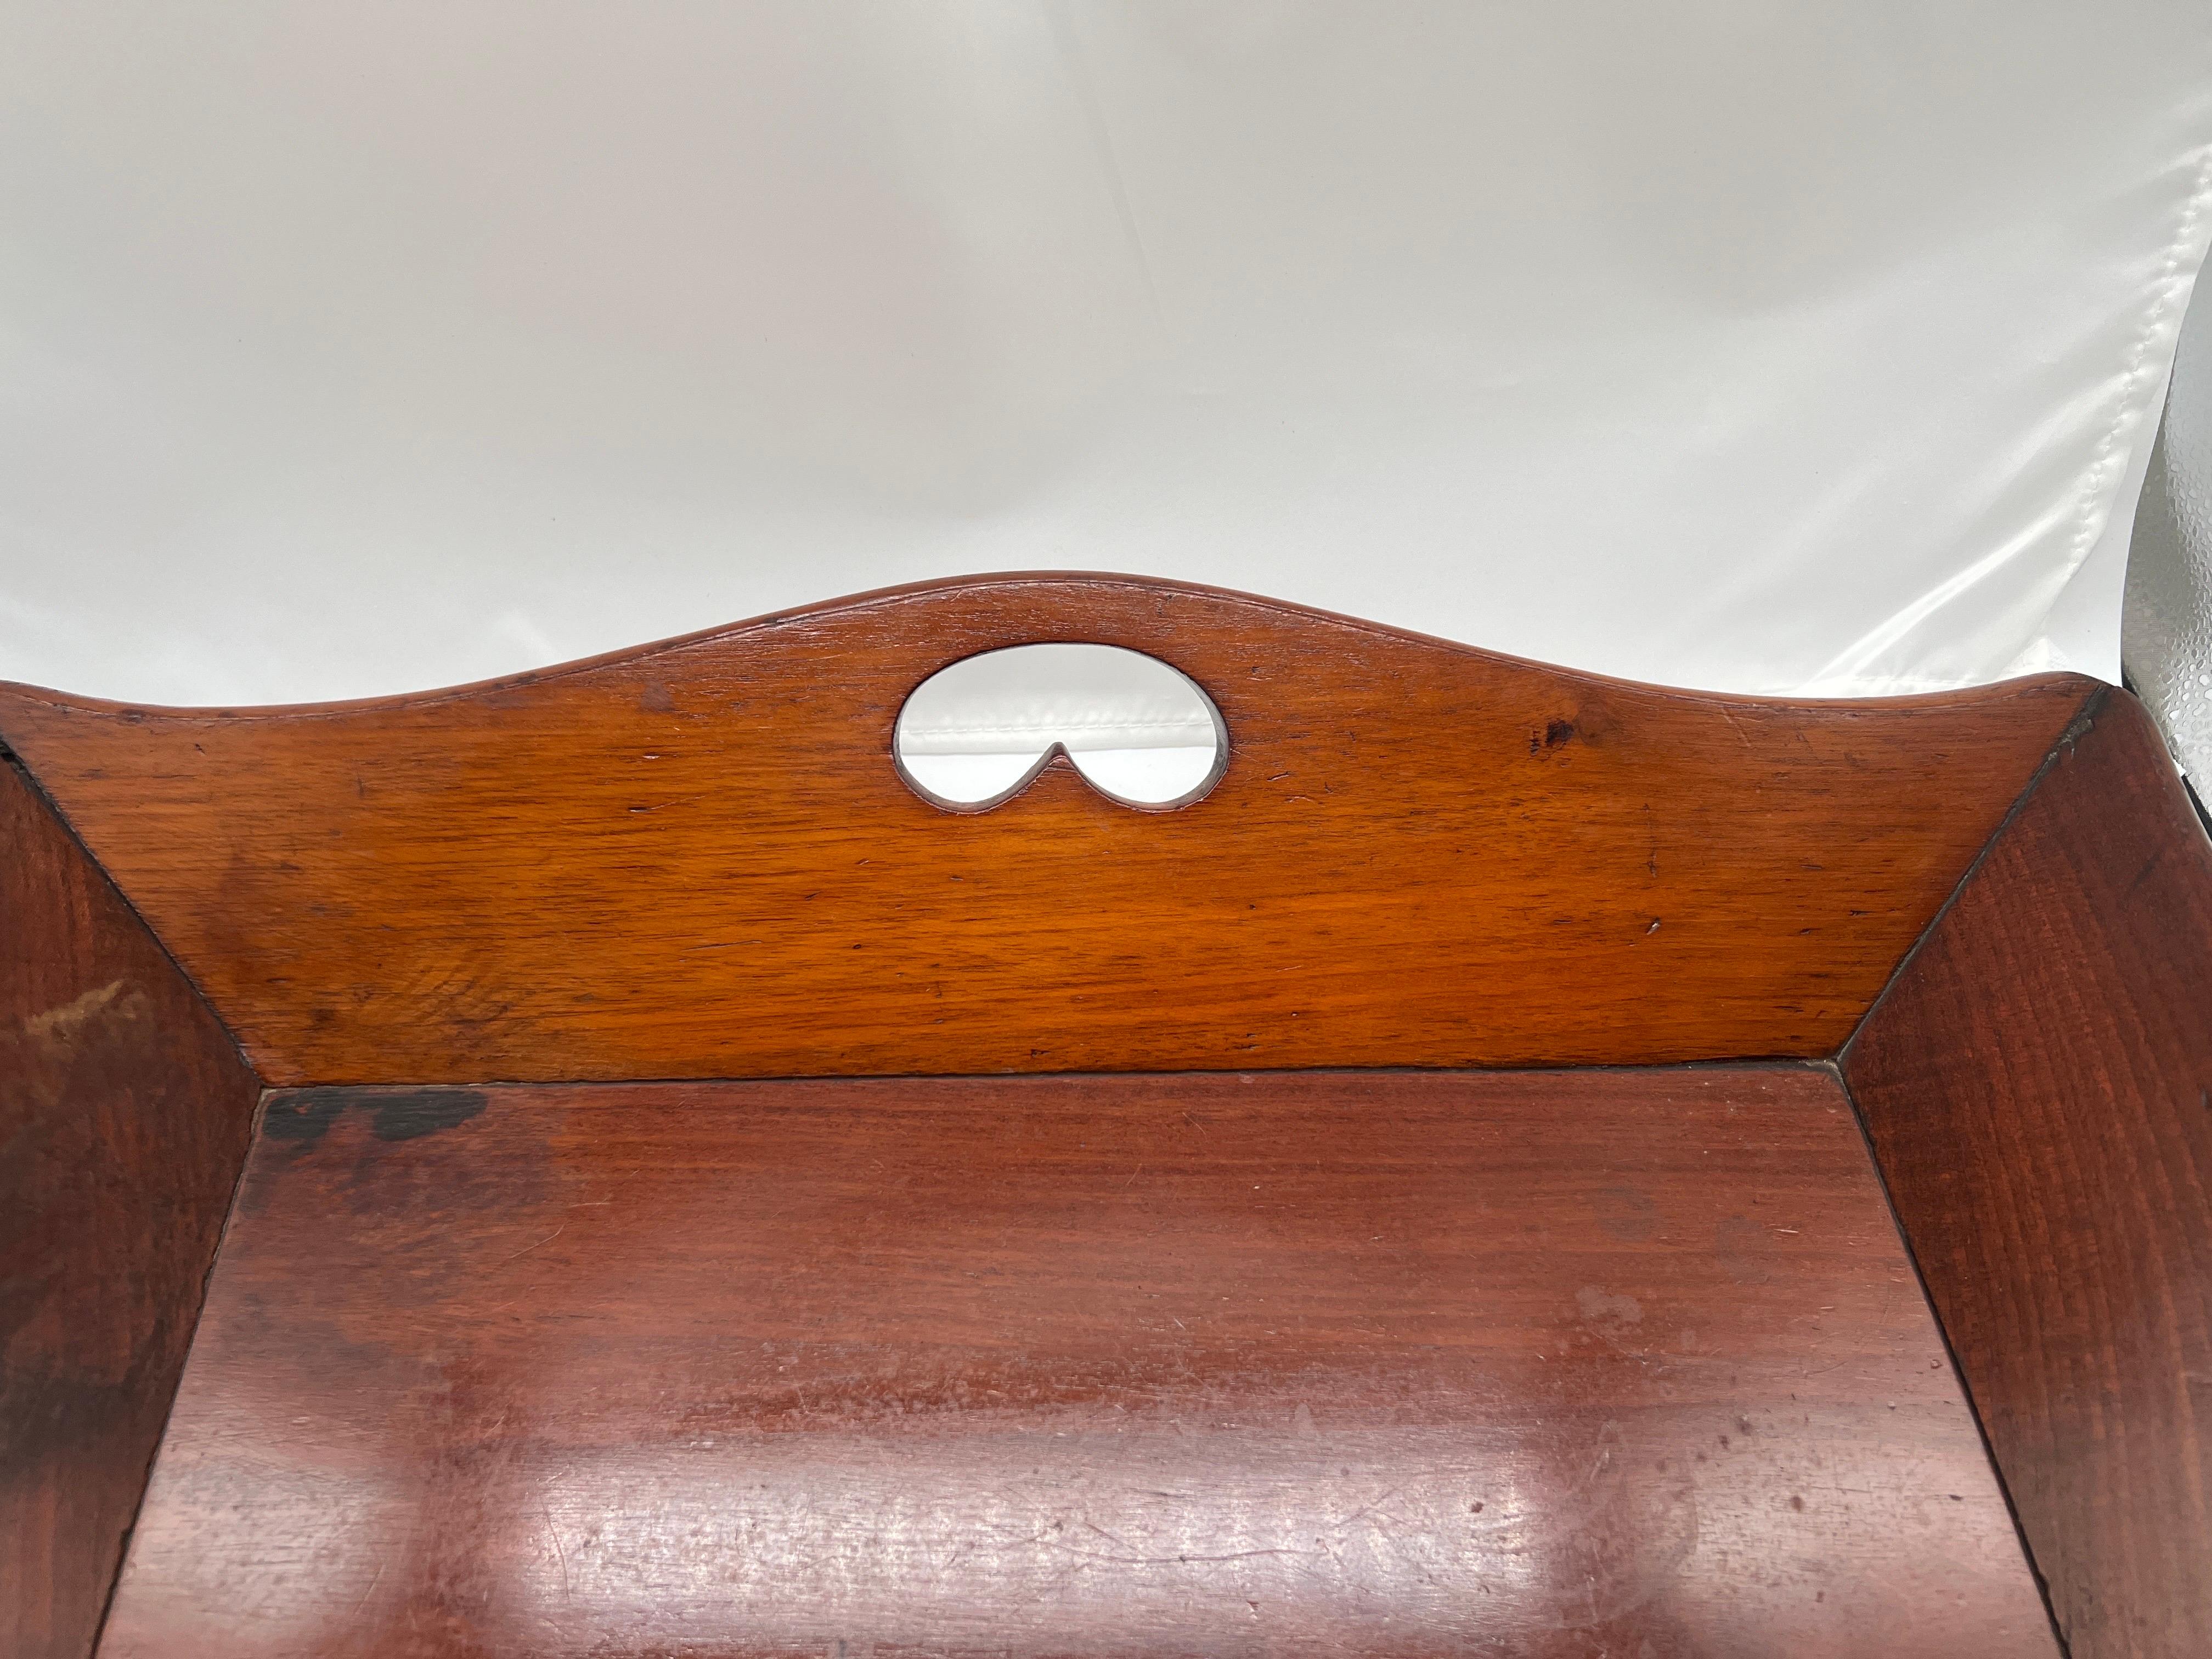 English, late 18th to early 19th century.

This fine quality mahogany tray is a very unusual form. The edges with a scalloped border and cut out handles to each. 

Provenance: From a Newport Rhode Island estate.